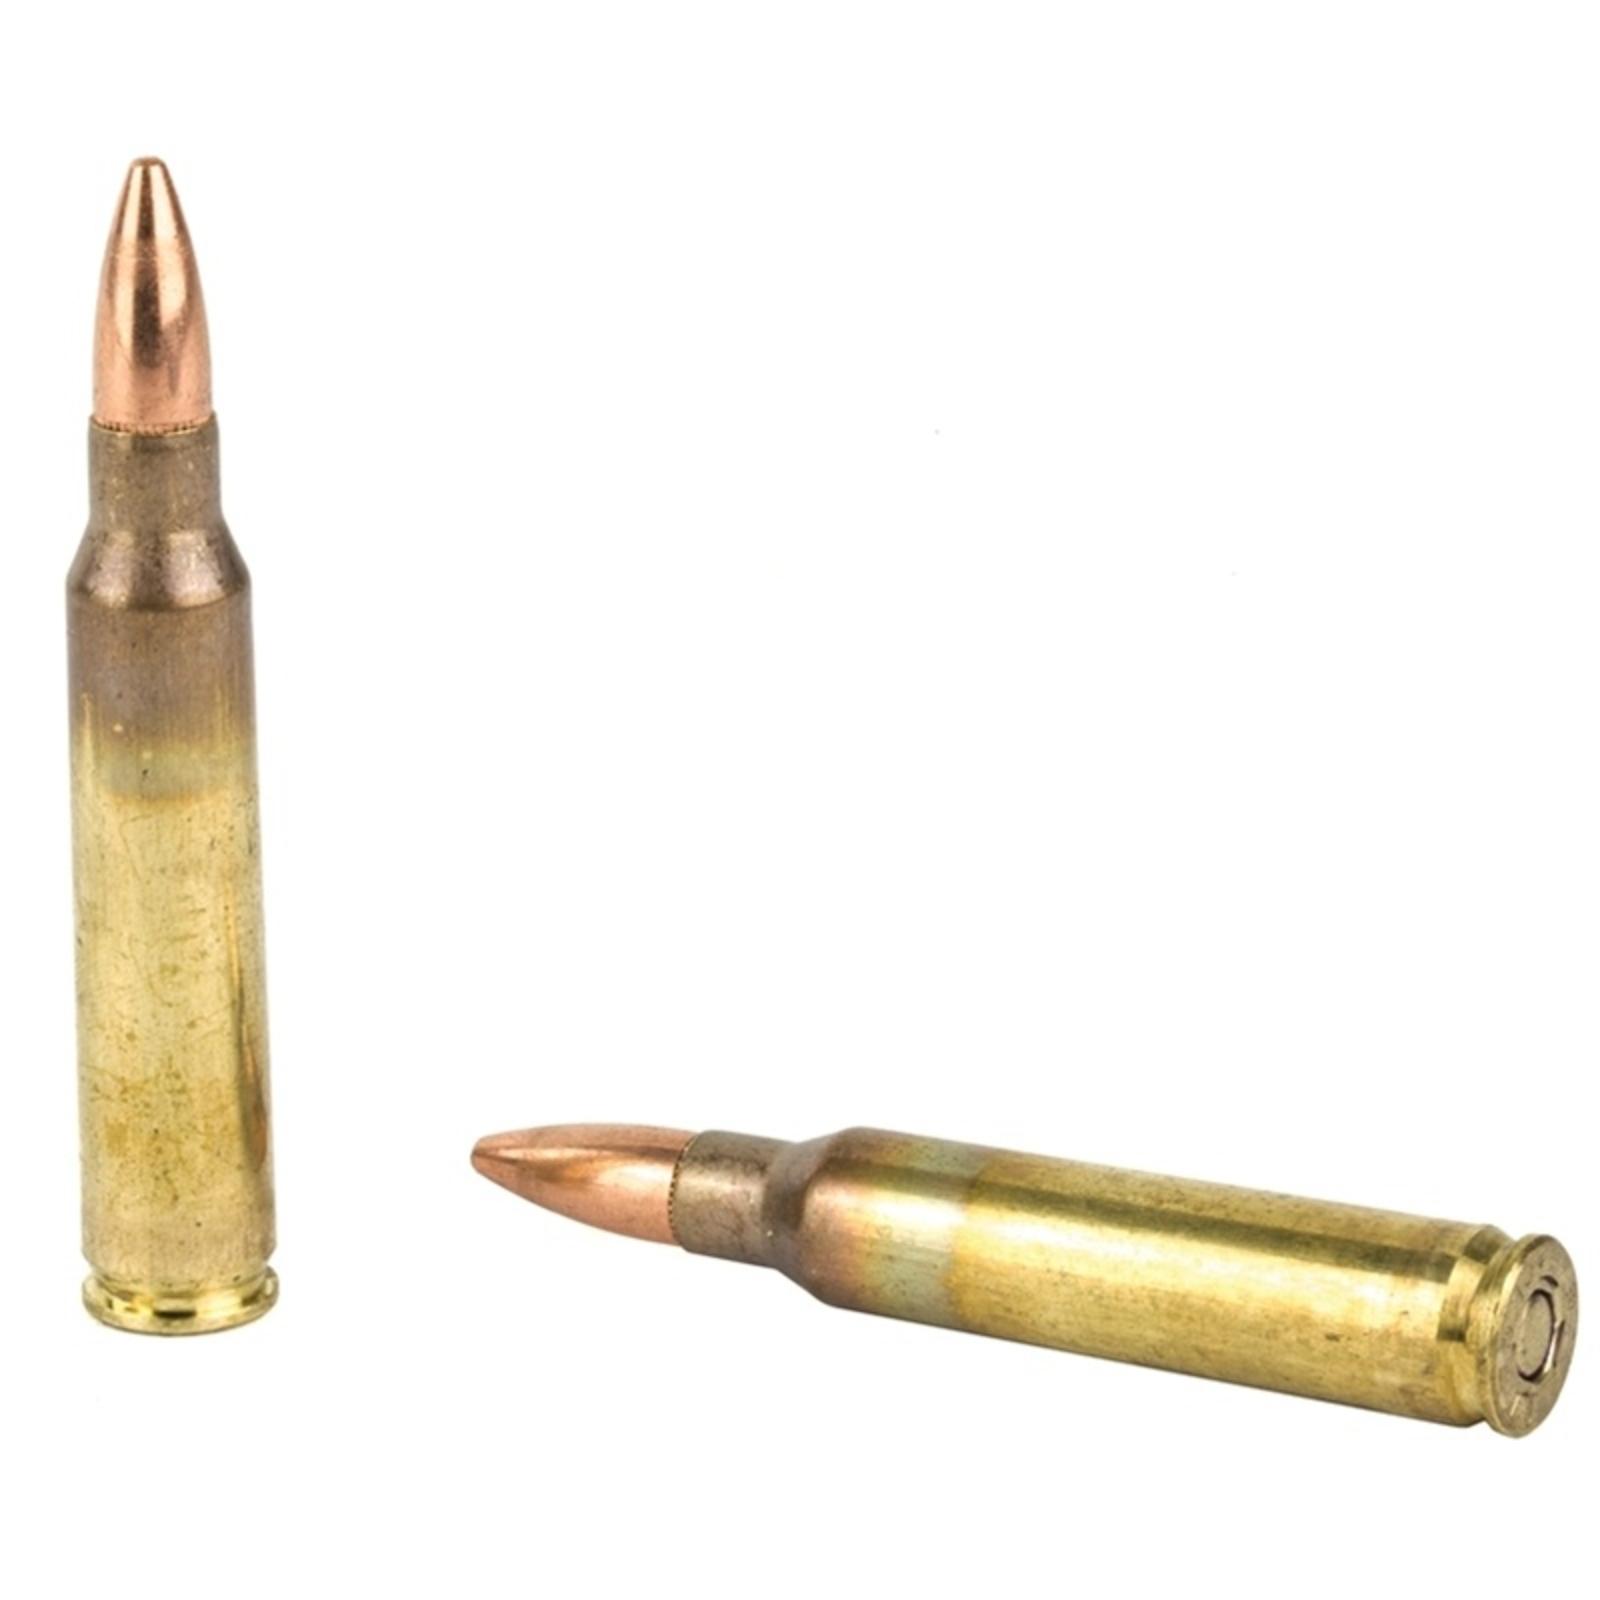 Winchester 5.56x45mm Ammo 55 Grain Full Metal Jacket 300 Rounds Can